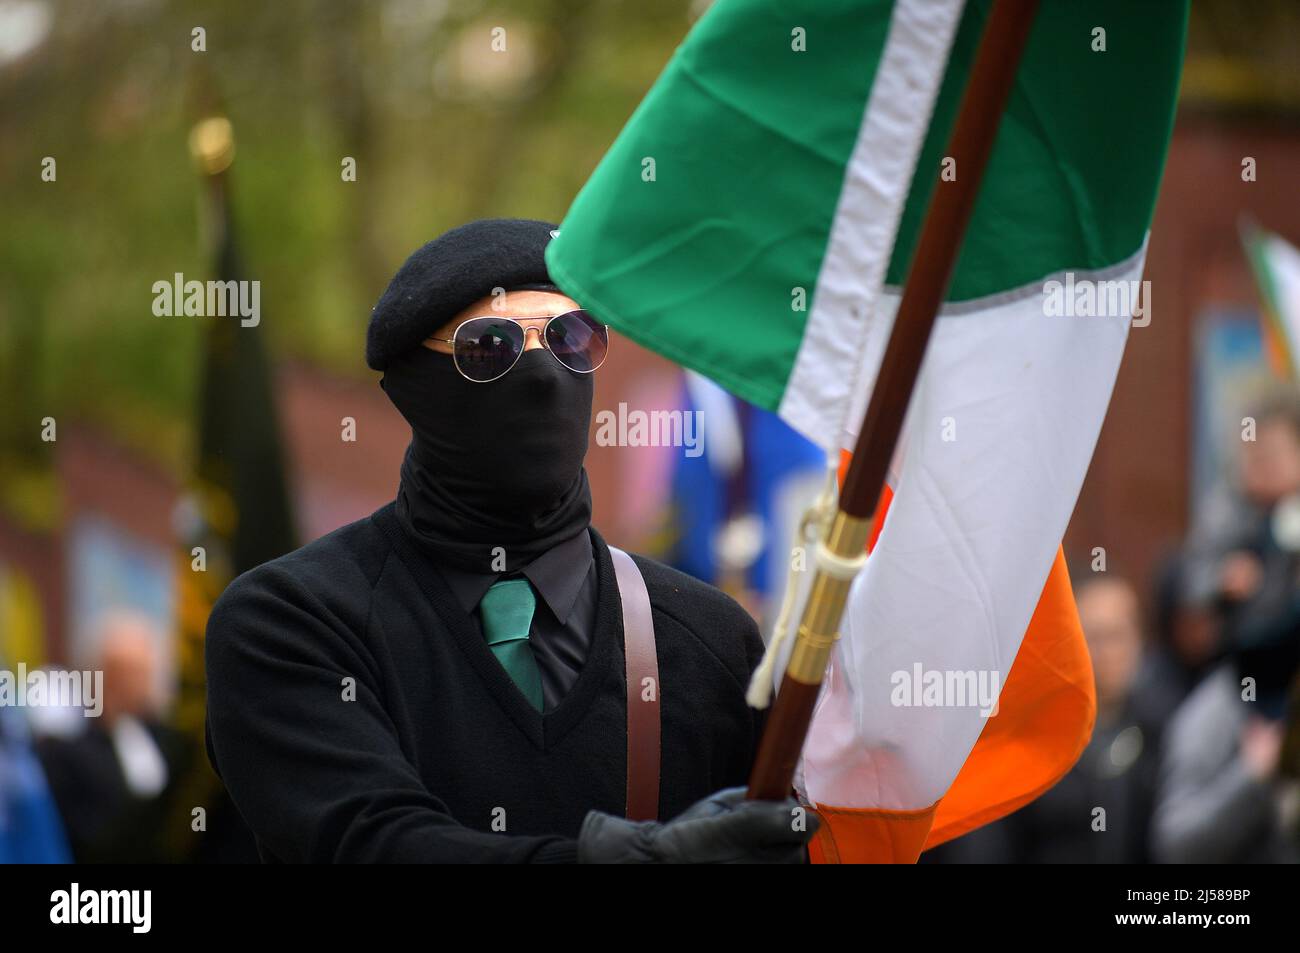 Masked men and women in paramilitary uniform at an Easter Masked man in paramilitary uniform carries Irish tricolour flag at an Easter Monday Dissident Republican parade in Derry, Northern Ireland 18 March 2022. ©George Sweeney / Alamy Stock Photo Stock Photo